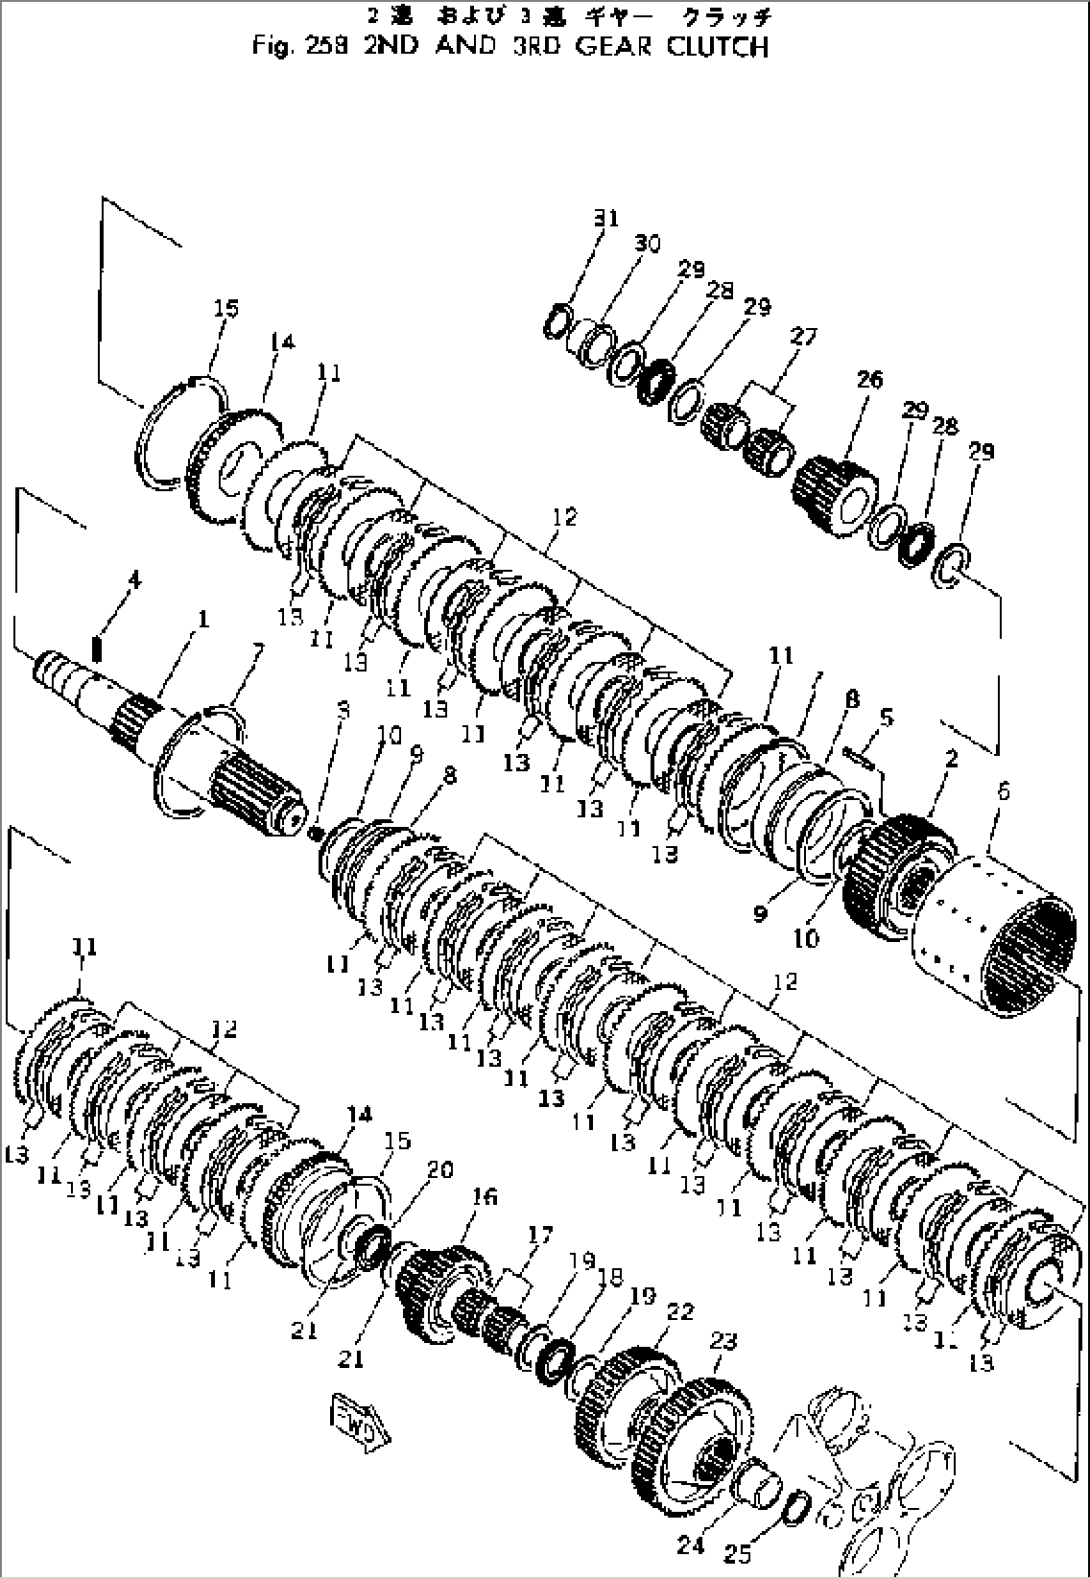 2ND AND 3RD GEAR CLUTCH(#10001-)